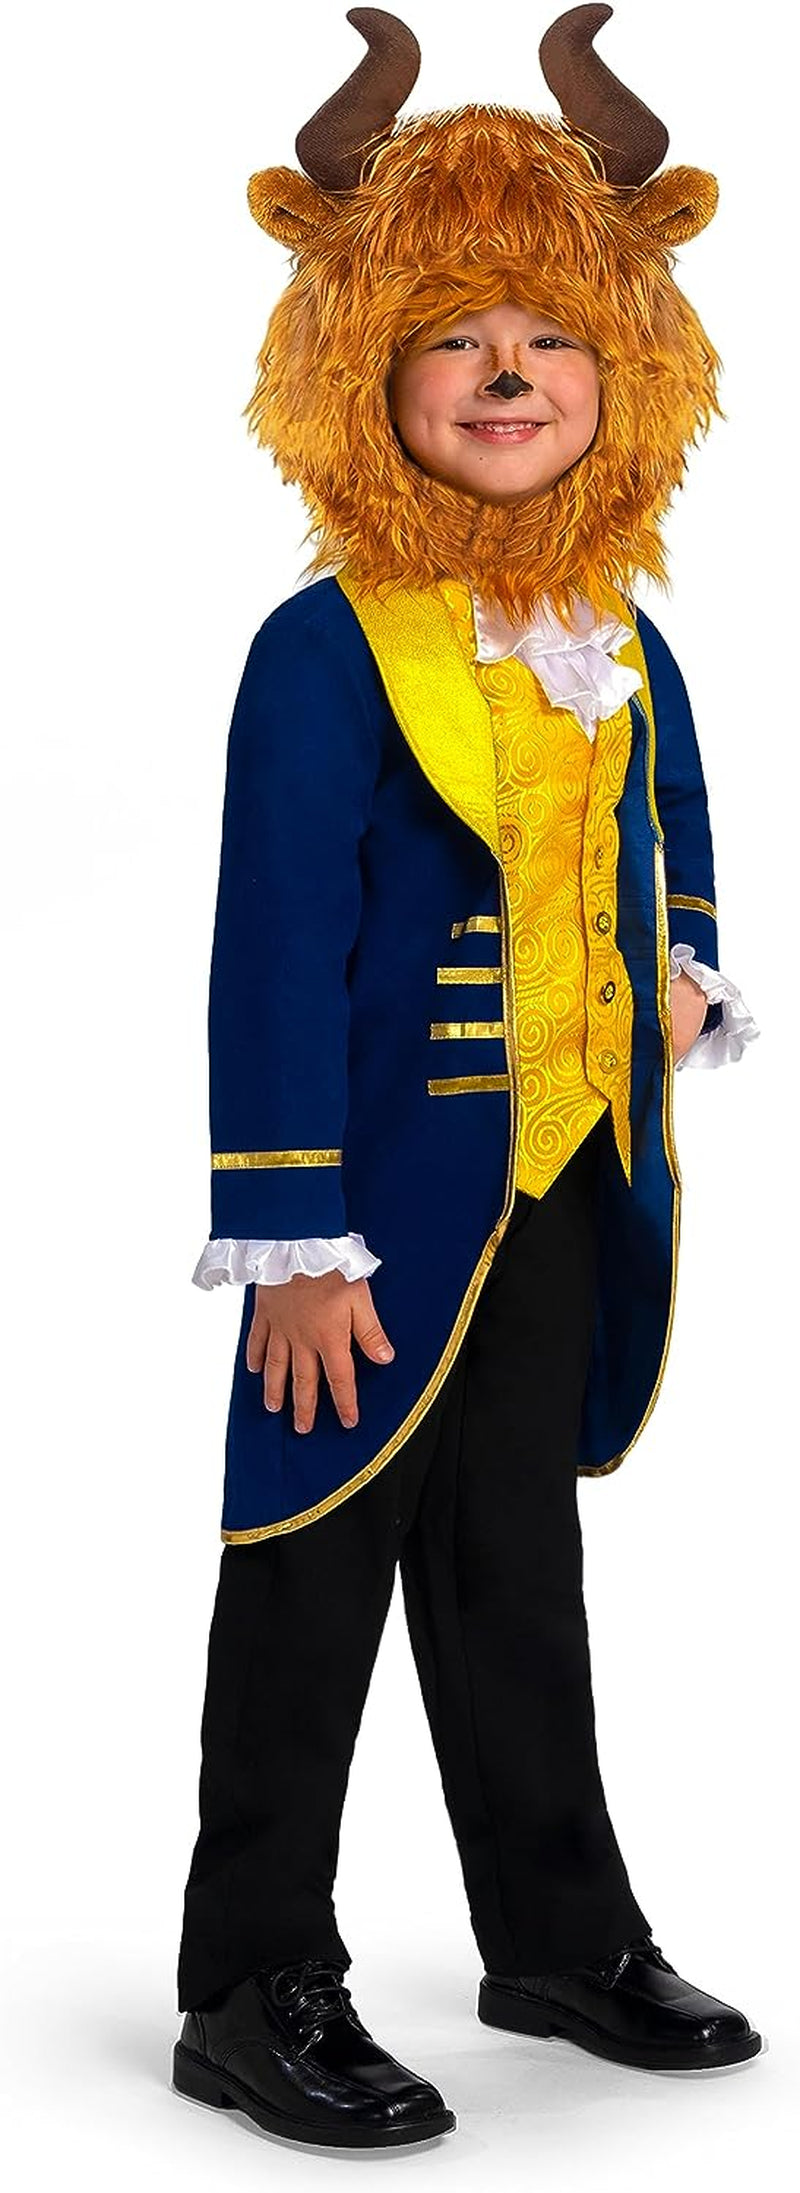 Spooktacular Creations Prince Costume for Boys, Blue Prince Charming Outfit with Beast Hood for Kids Halloween Dress Up  Spooktacular Creations   